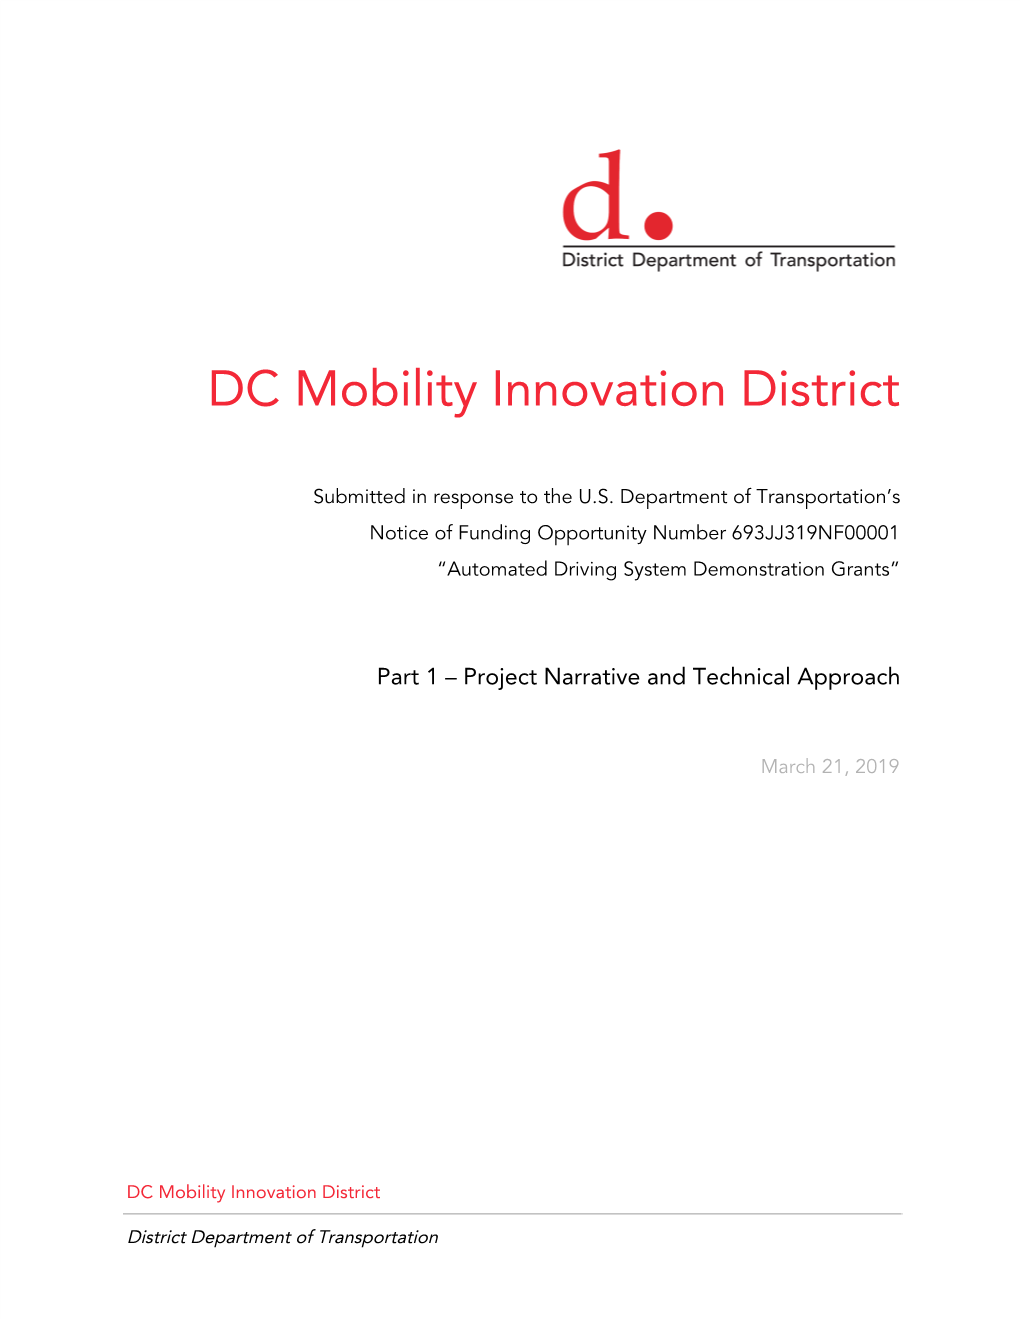 DC Mobility Innovation District